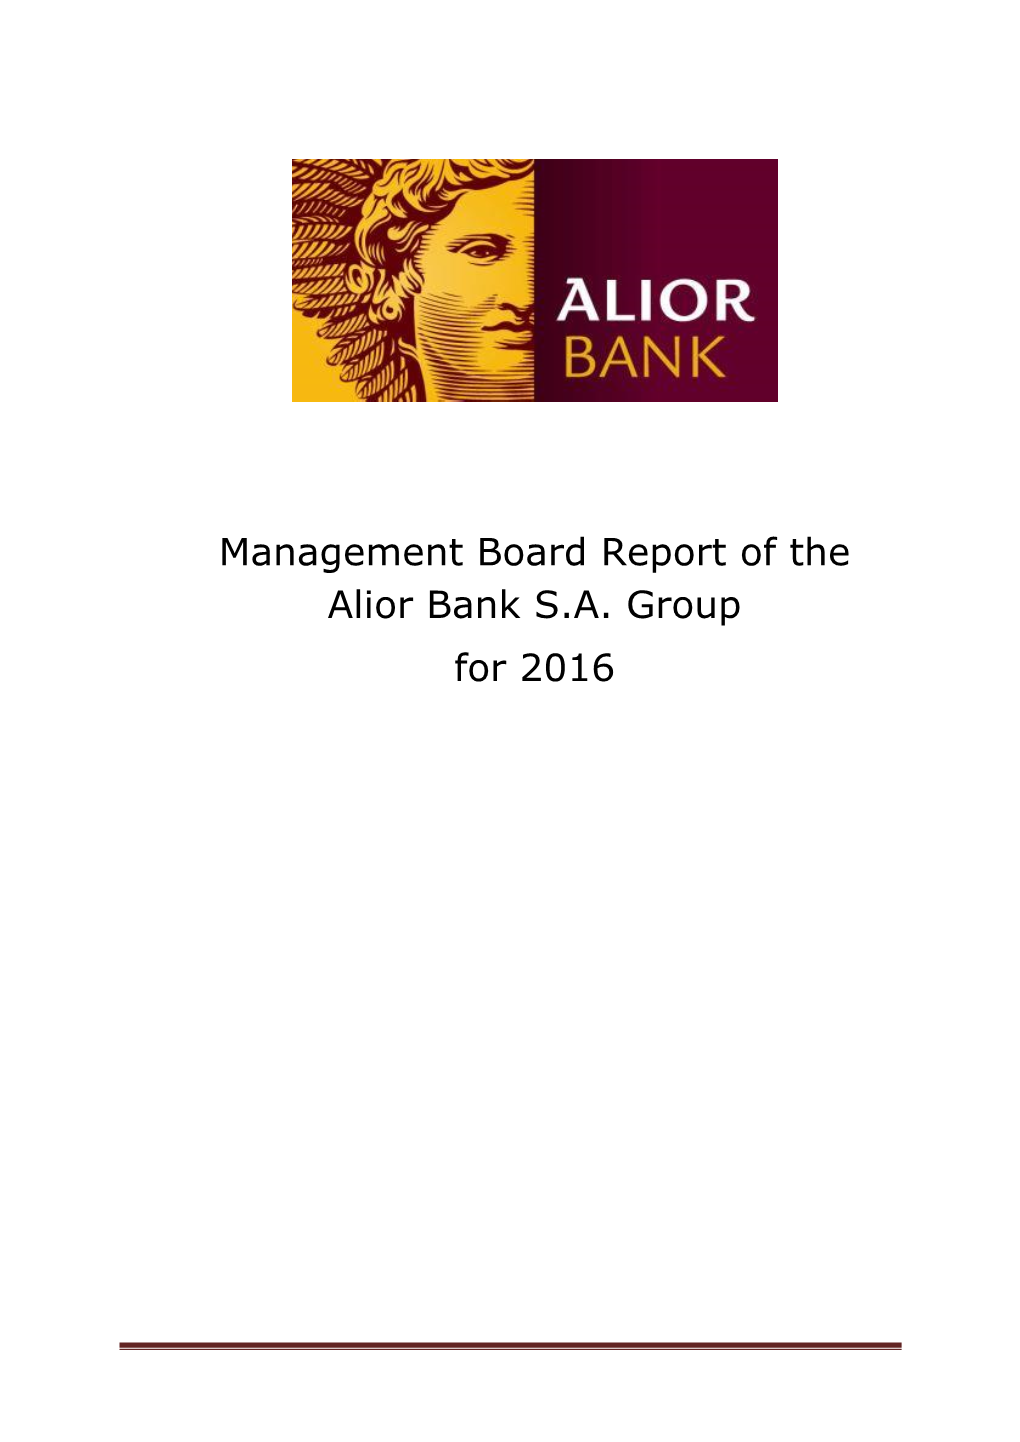 Management Board Report of the Alior Bank S.A. Group for 2016